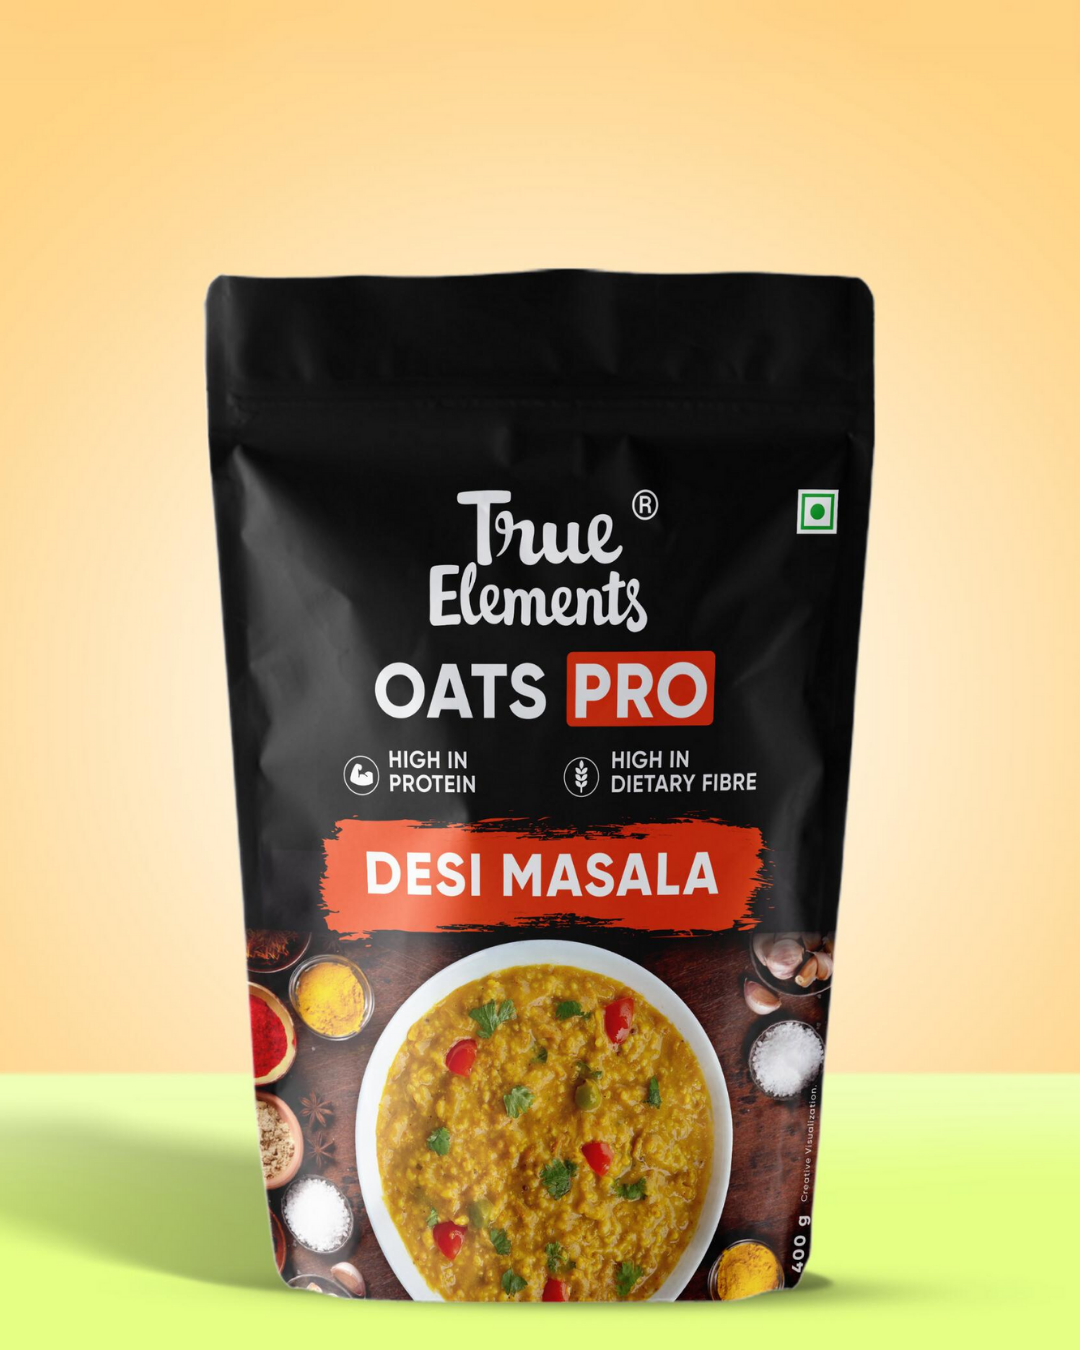 Oats Pro Desi Masala (Contains 15.7g Protein)